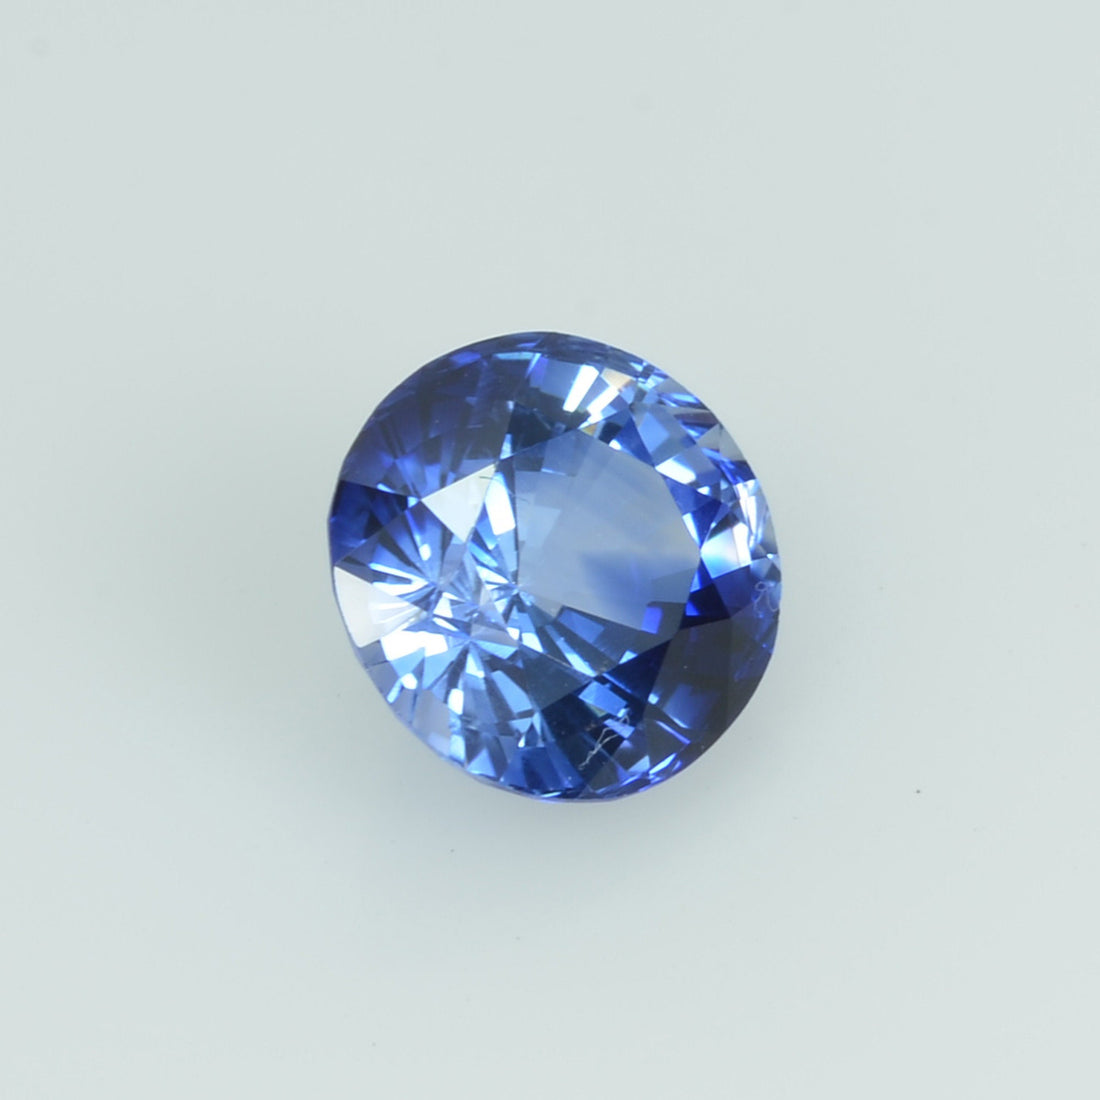 1.28 Cts Natural Blue Sapphire Loose Gemstone Round Cut